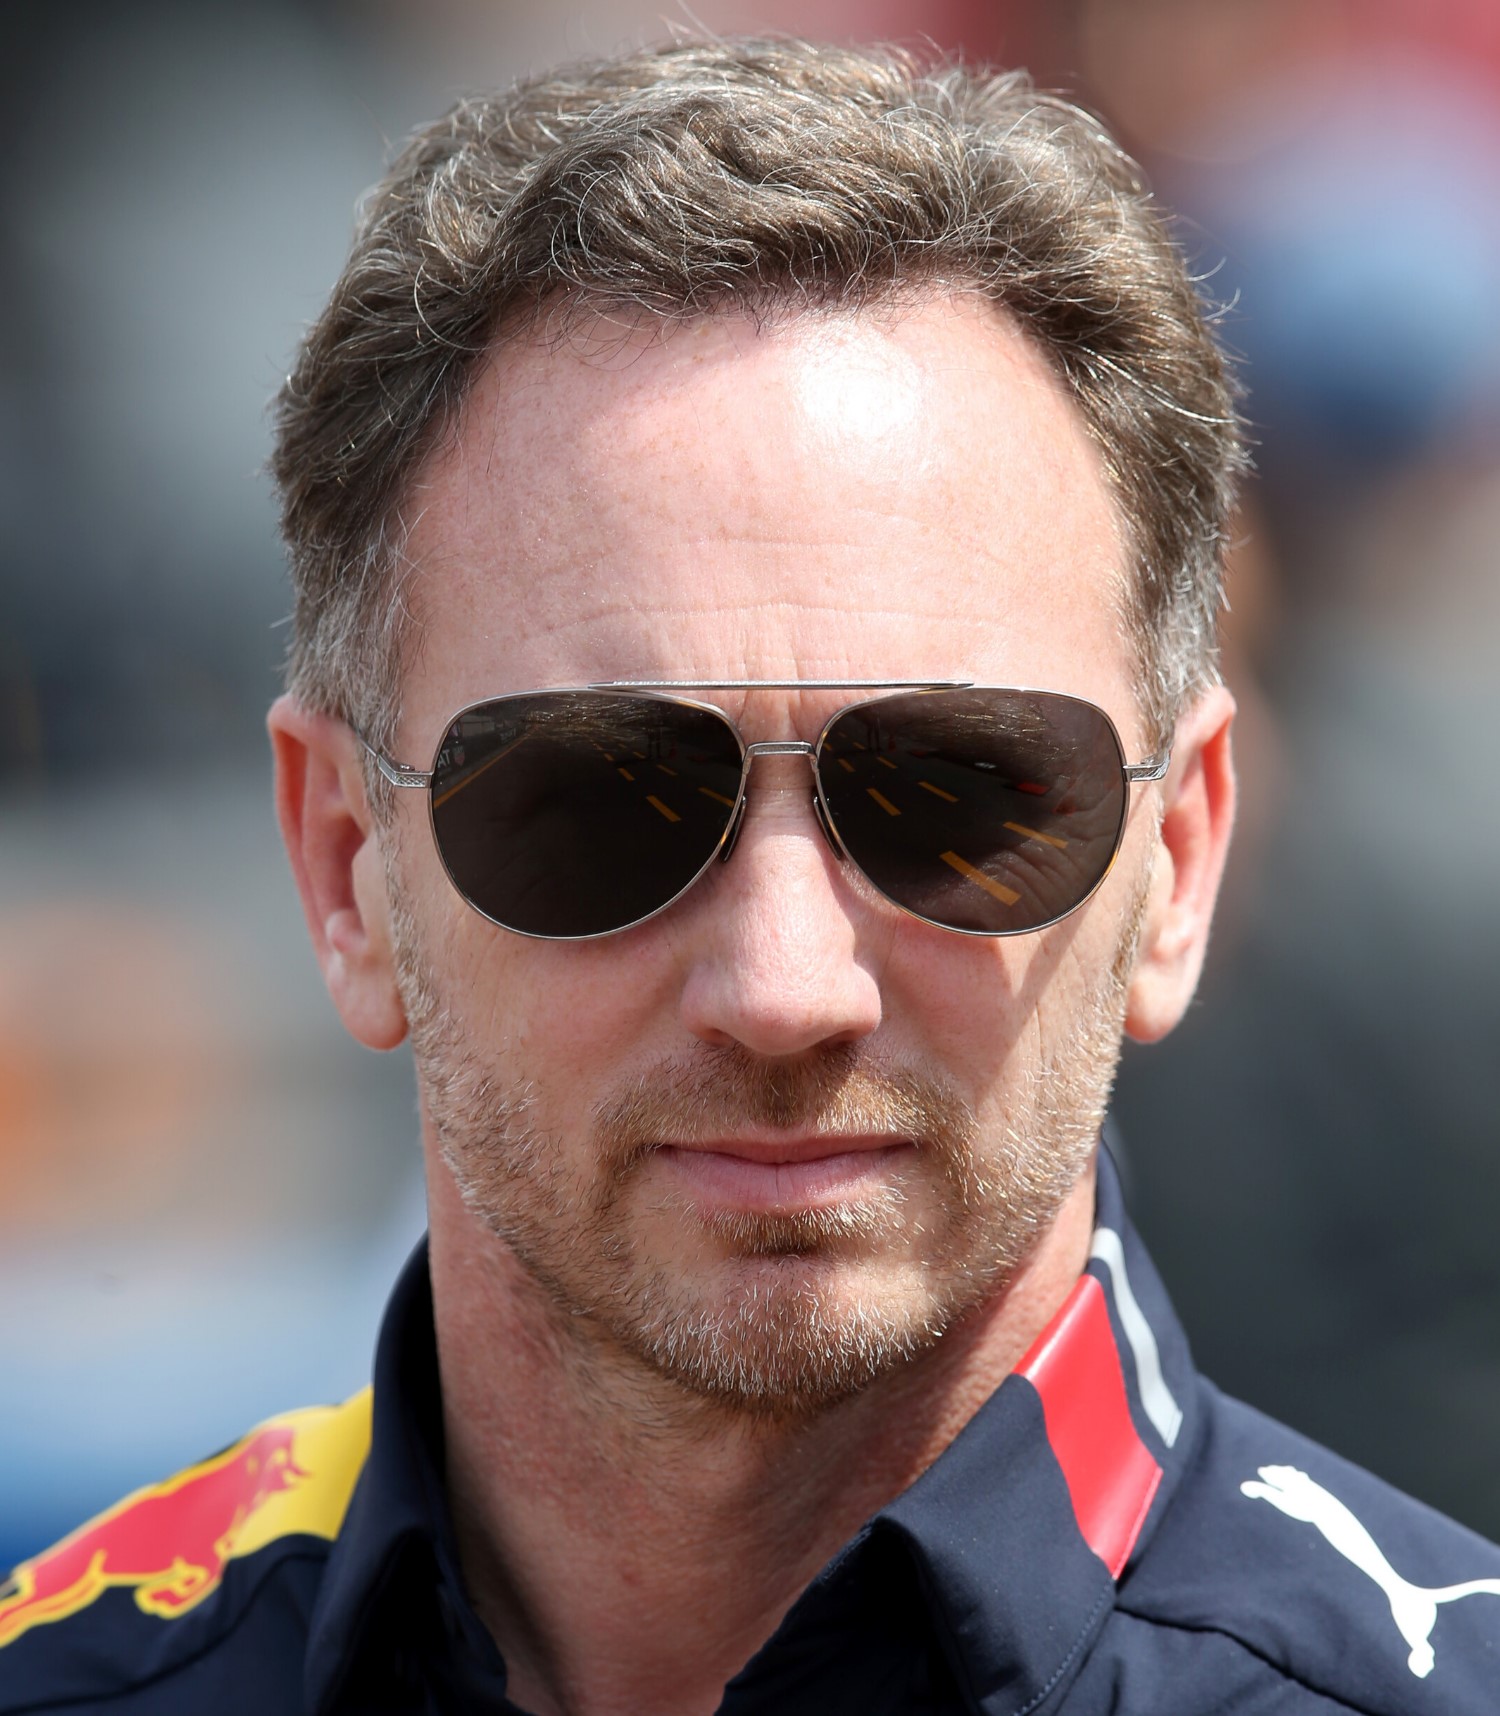 Horner says he expects more cancellations